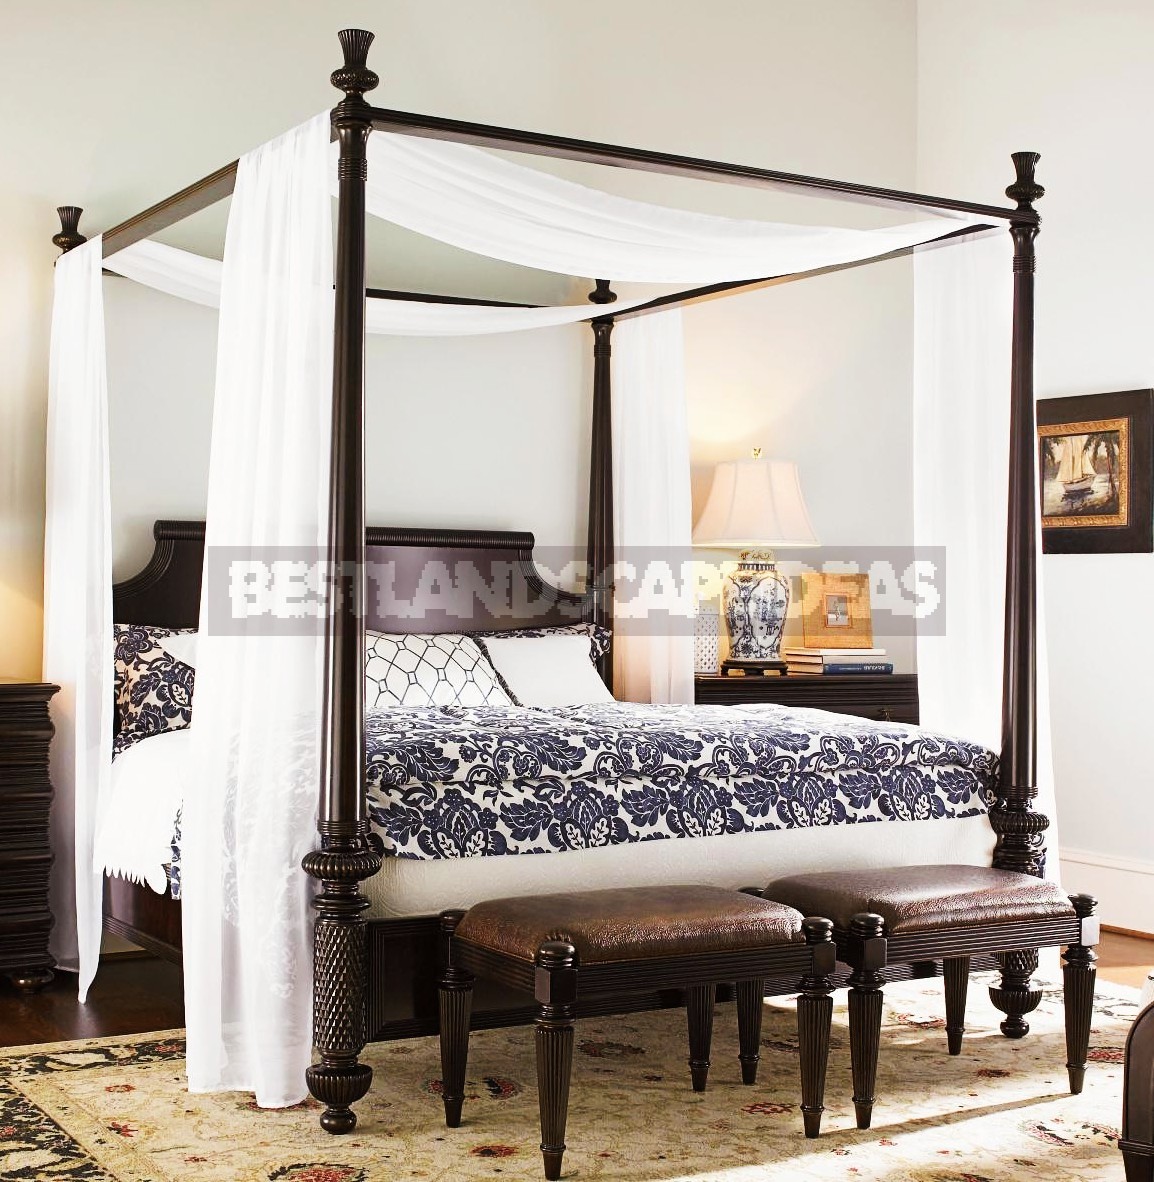 Cottage Bedroom With a Valance — Why Not?